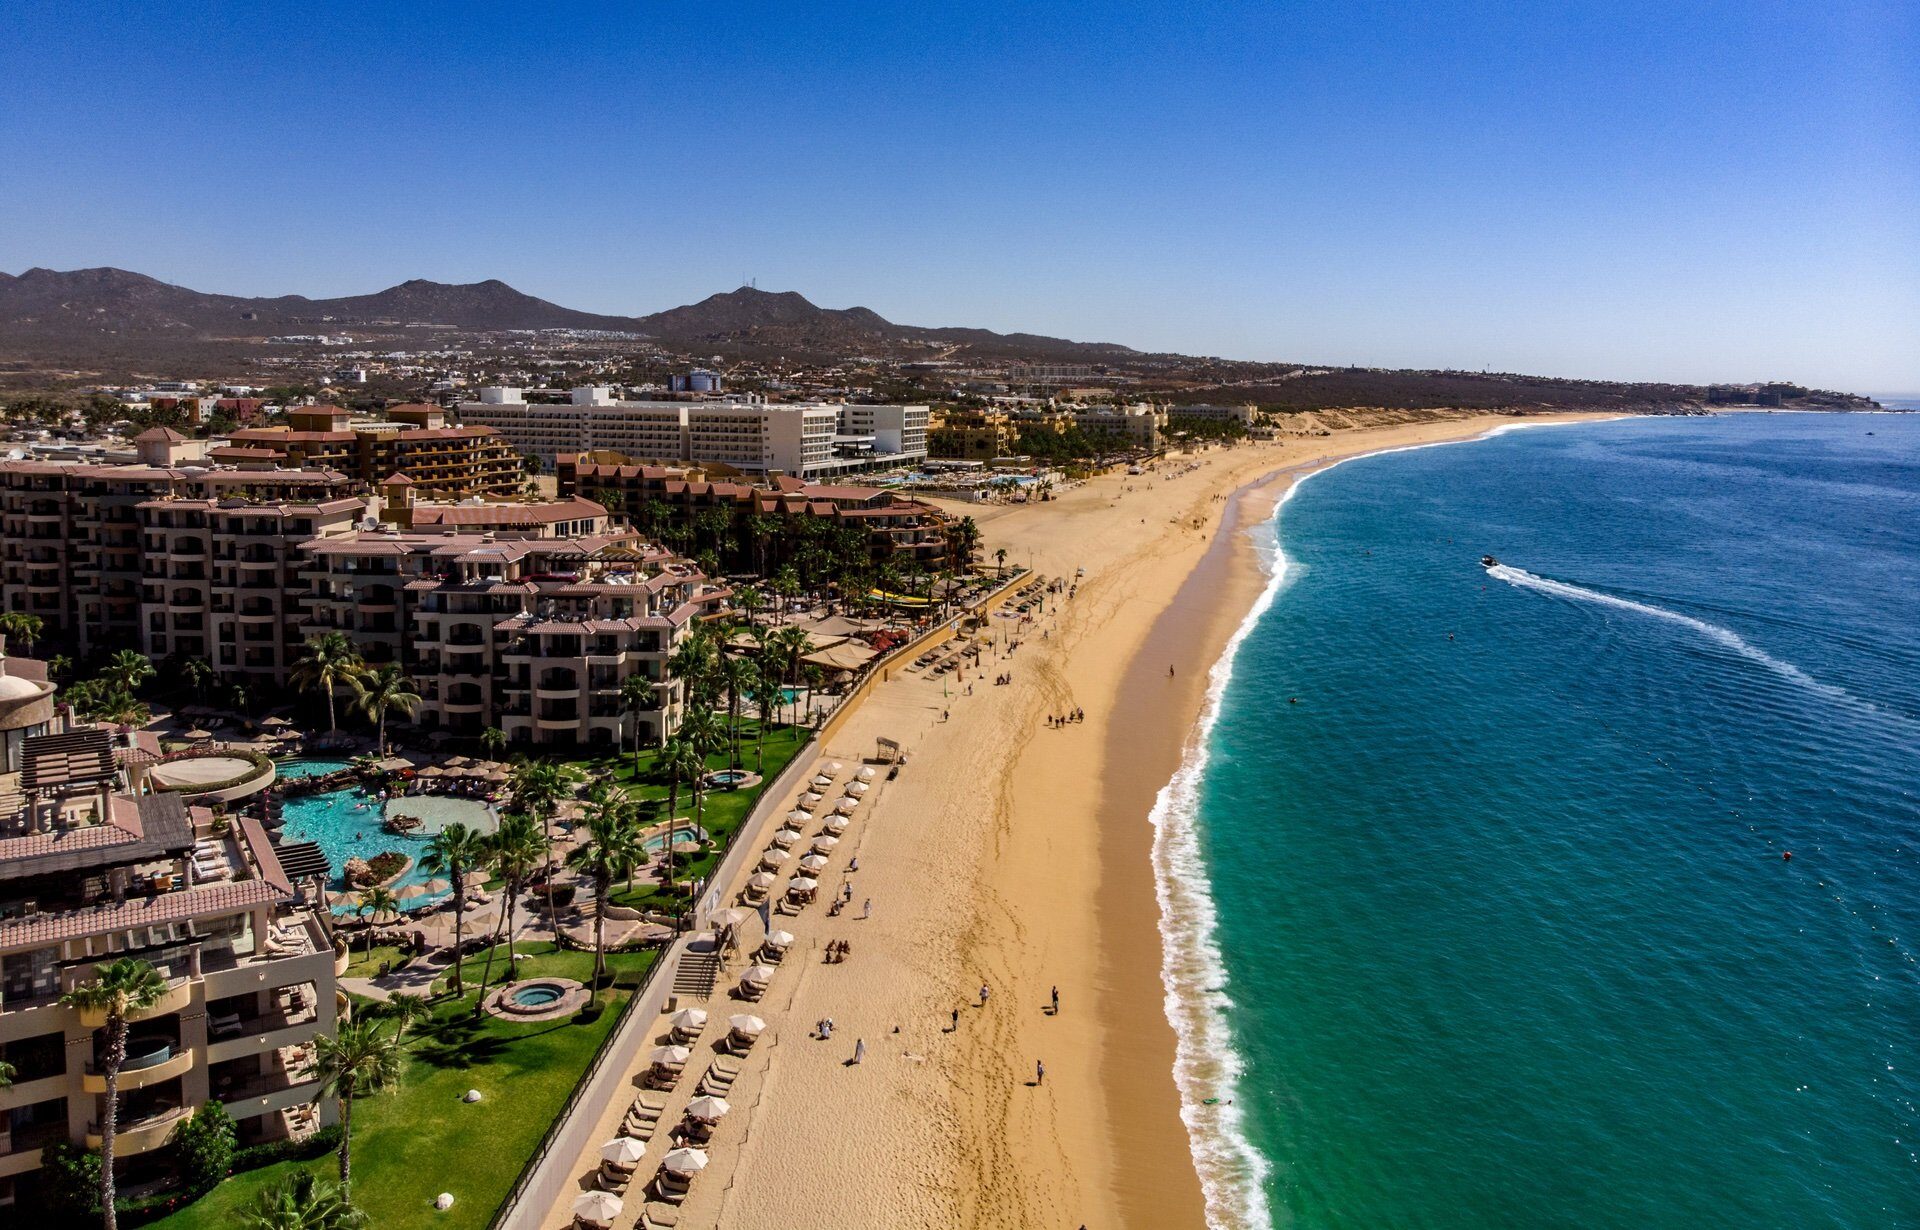 13 Best Things to Do in Cabo San Lucas | Celebrity Cruises